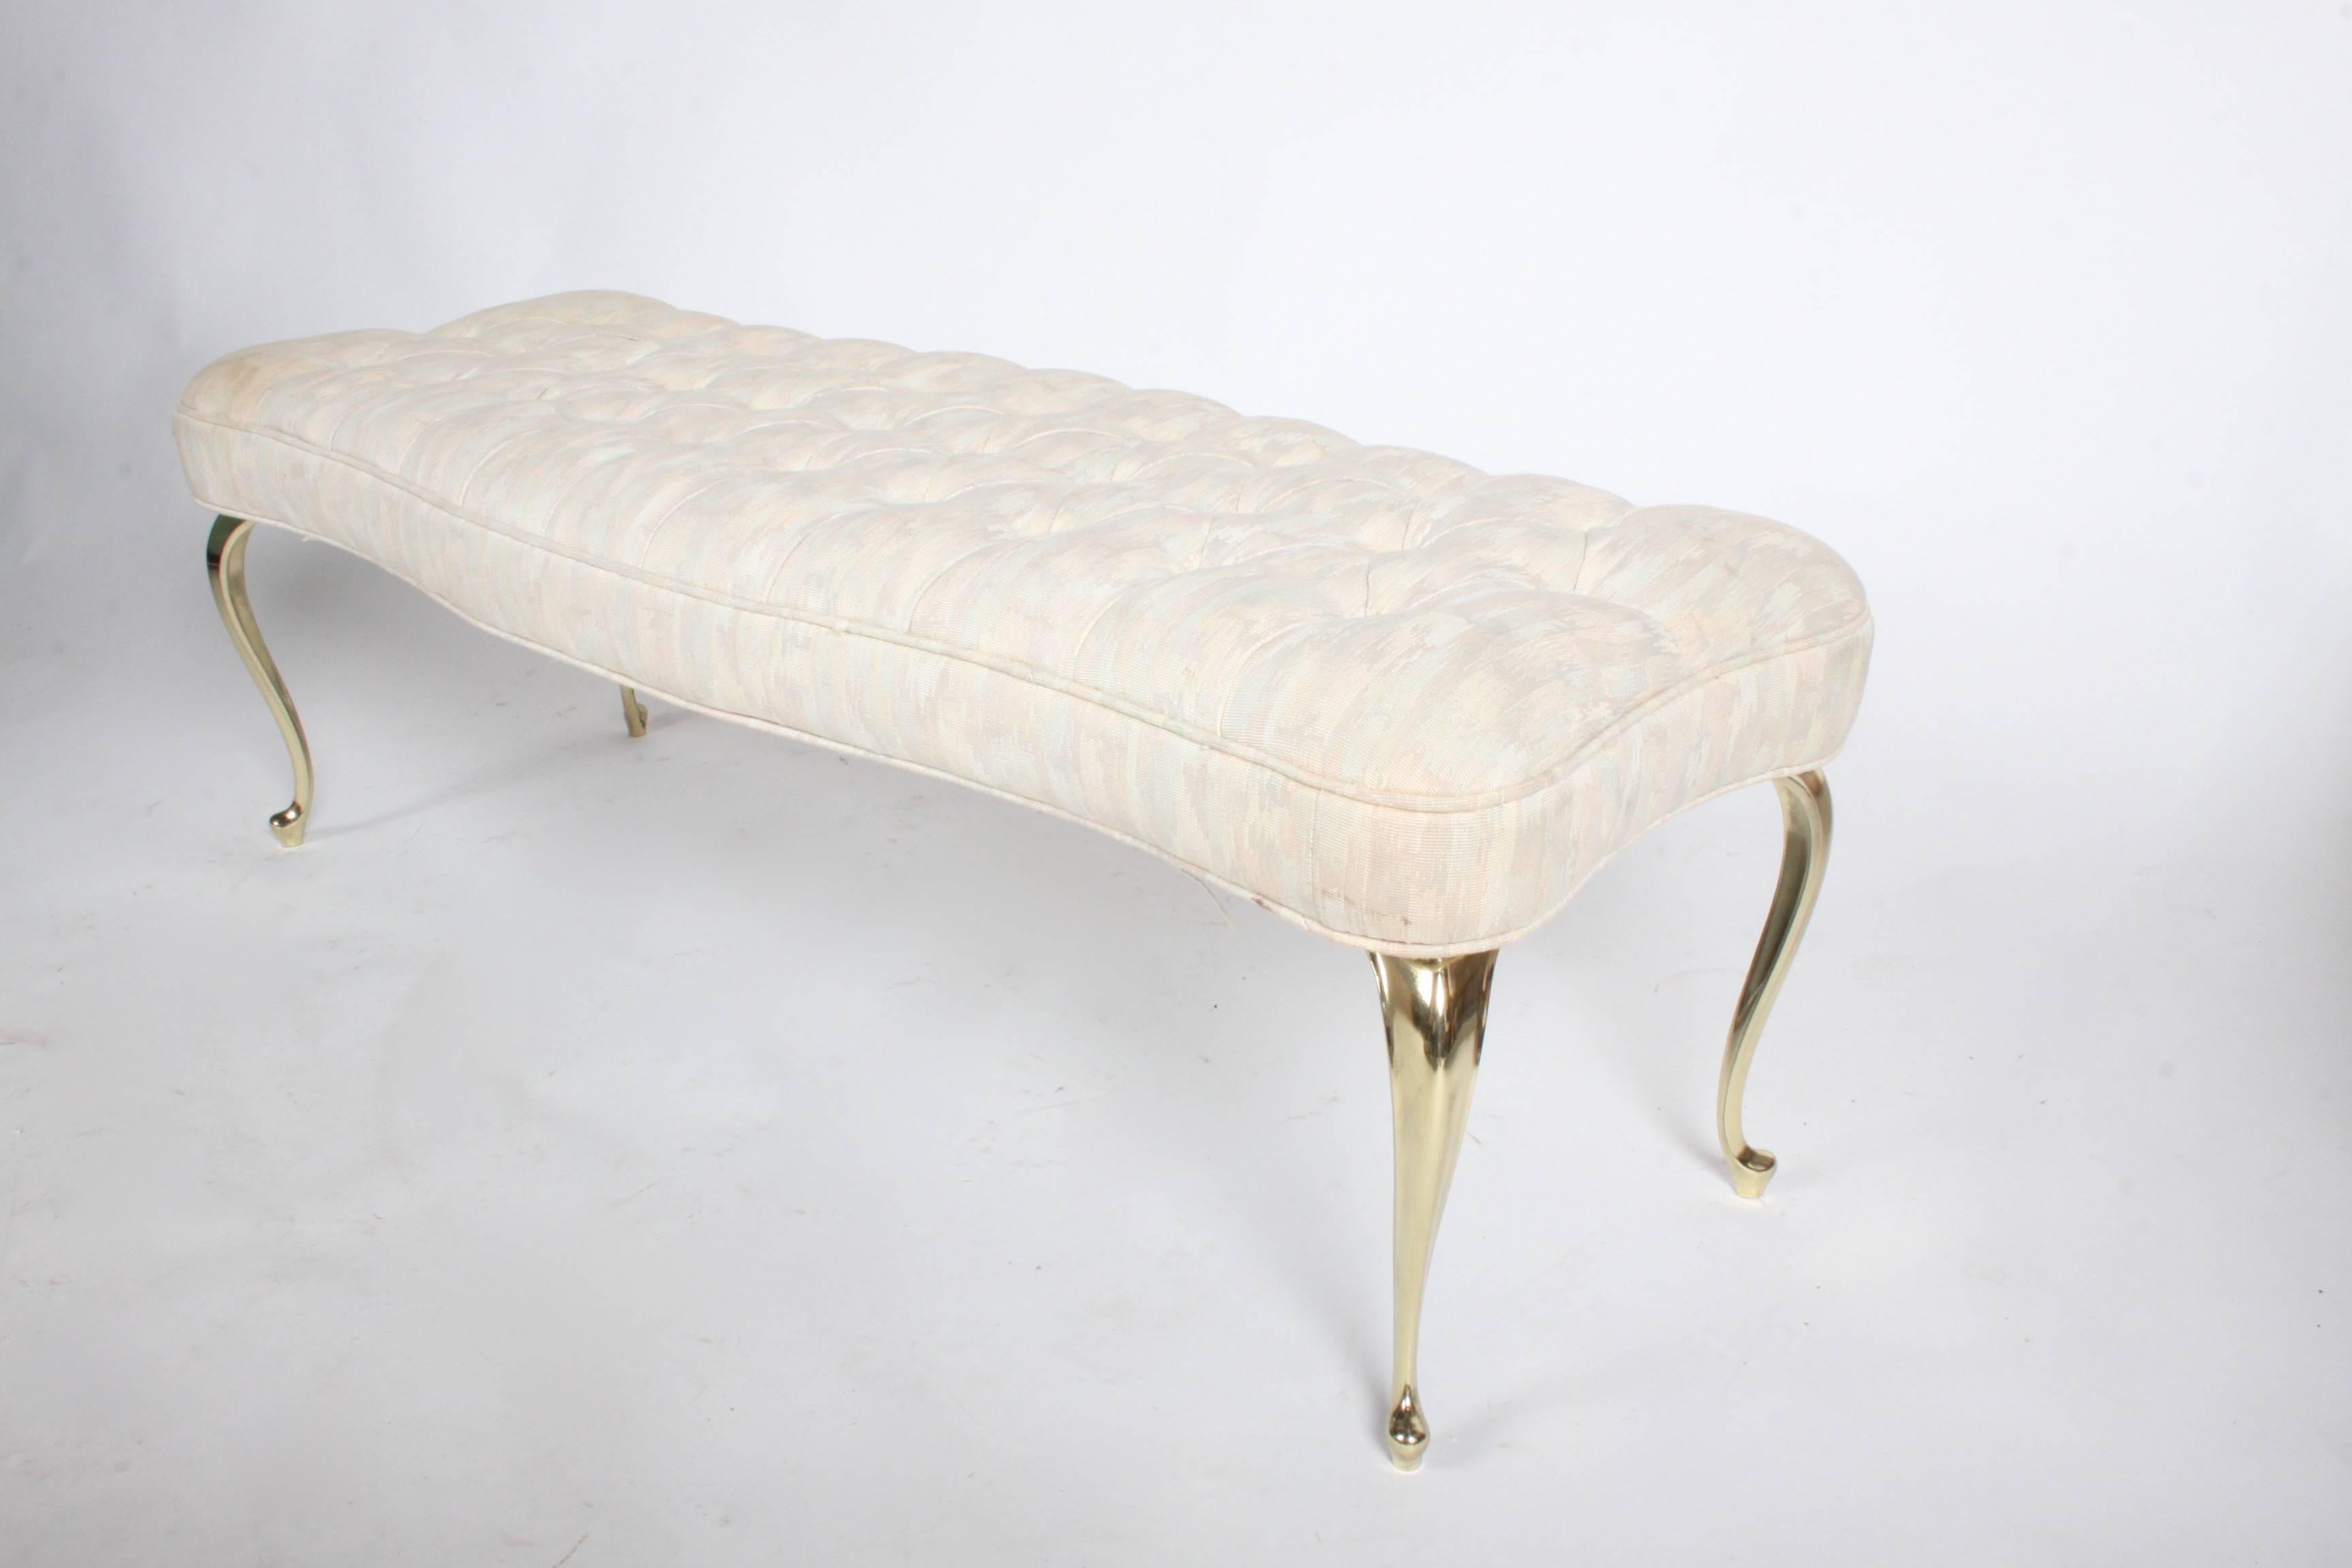 Hollywood Regency tufted bench with nice neoclassical style brass plated legs. Legs have been polished and re-plated in a warm butler brass finish. Upholstery is in need of updating. This makes a great end of the bed bench, circa 1950s.